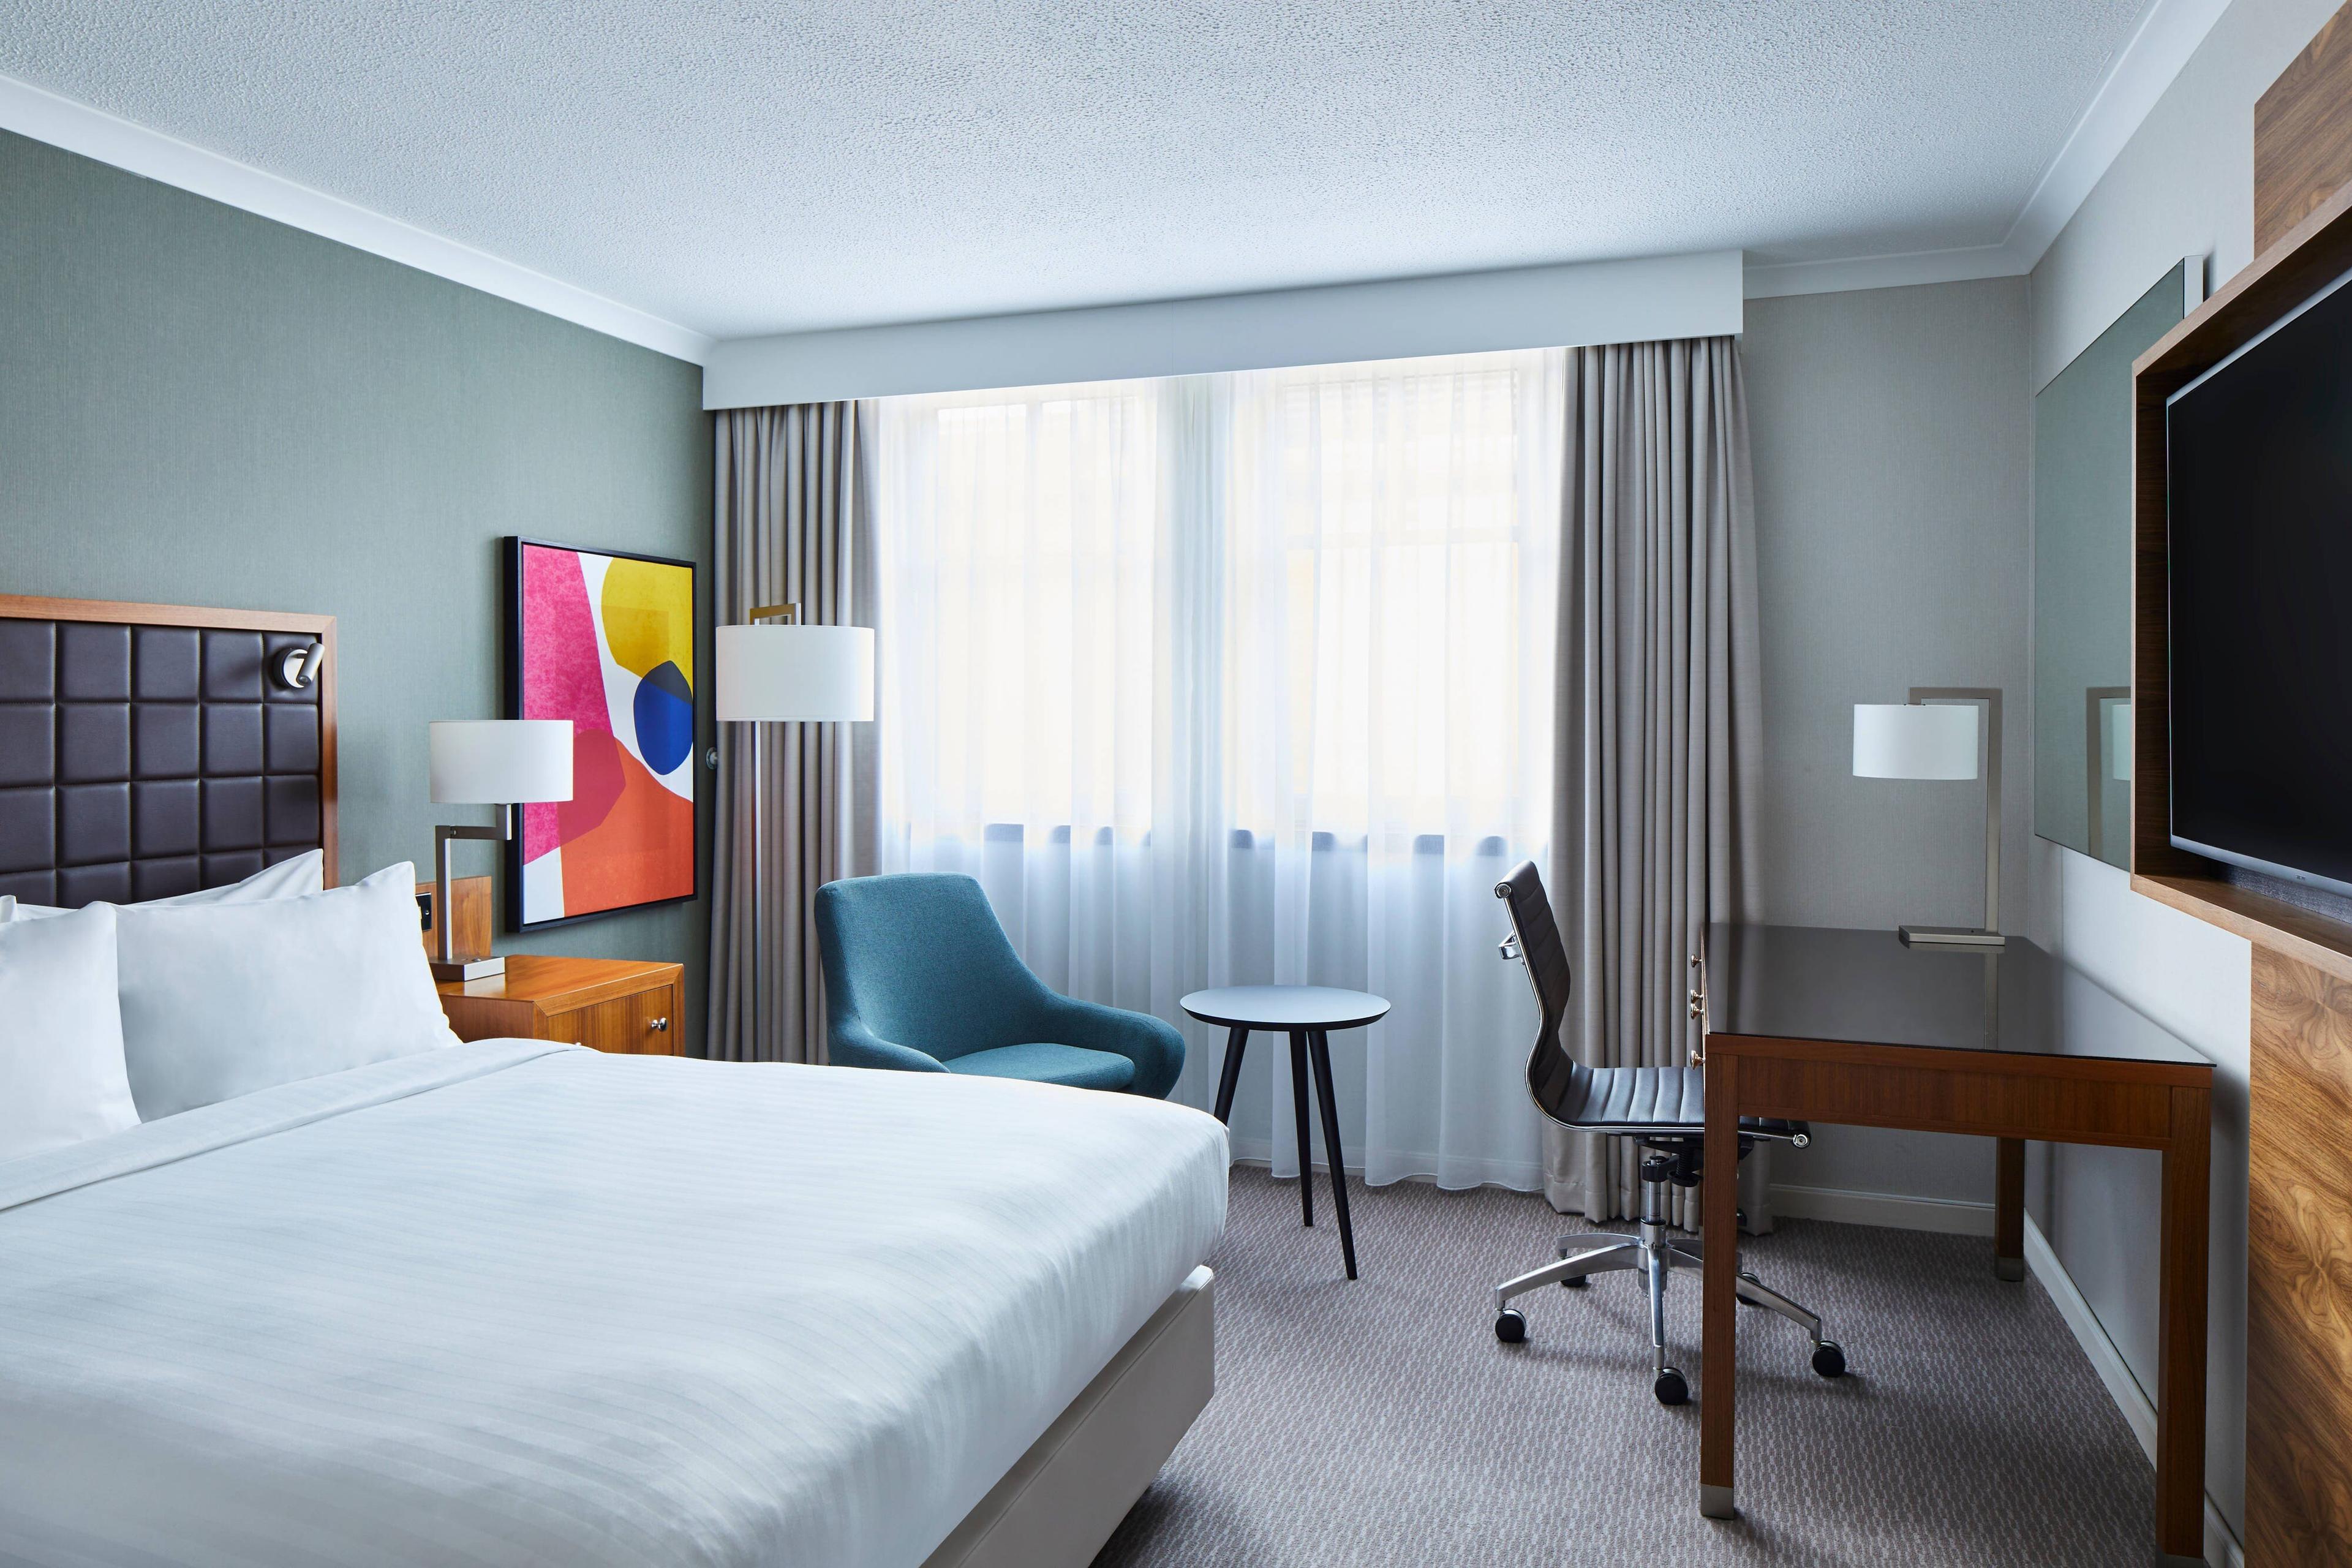 Stay in a spacious and comfortable Deluxe Queen guest room with high speed Wi-Fi access, and stay productive with a work space and an ergonomic chair.